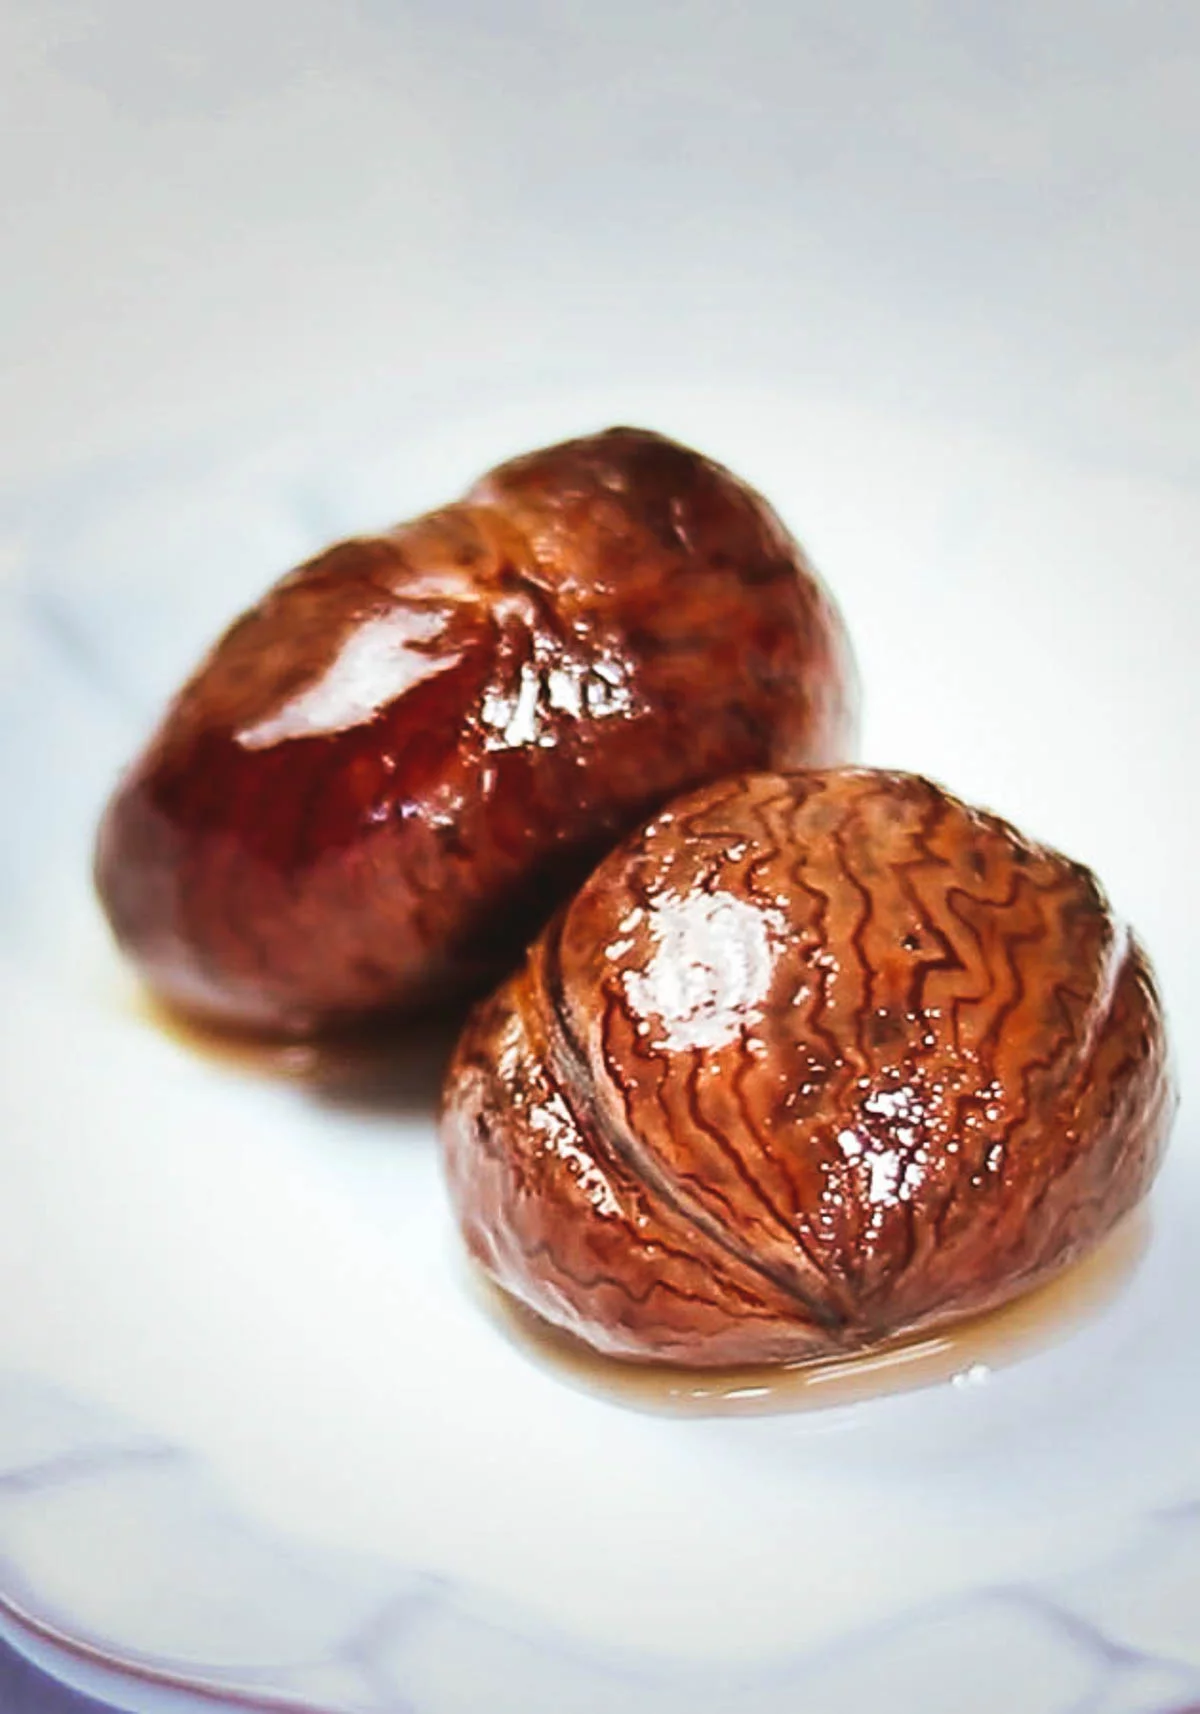 How to cook chestnuts with astringent skin